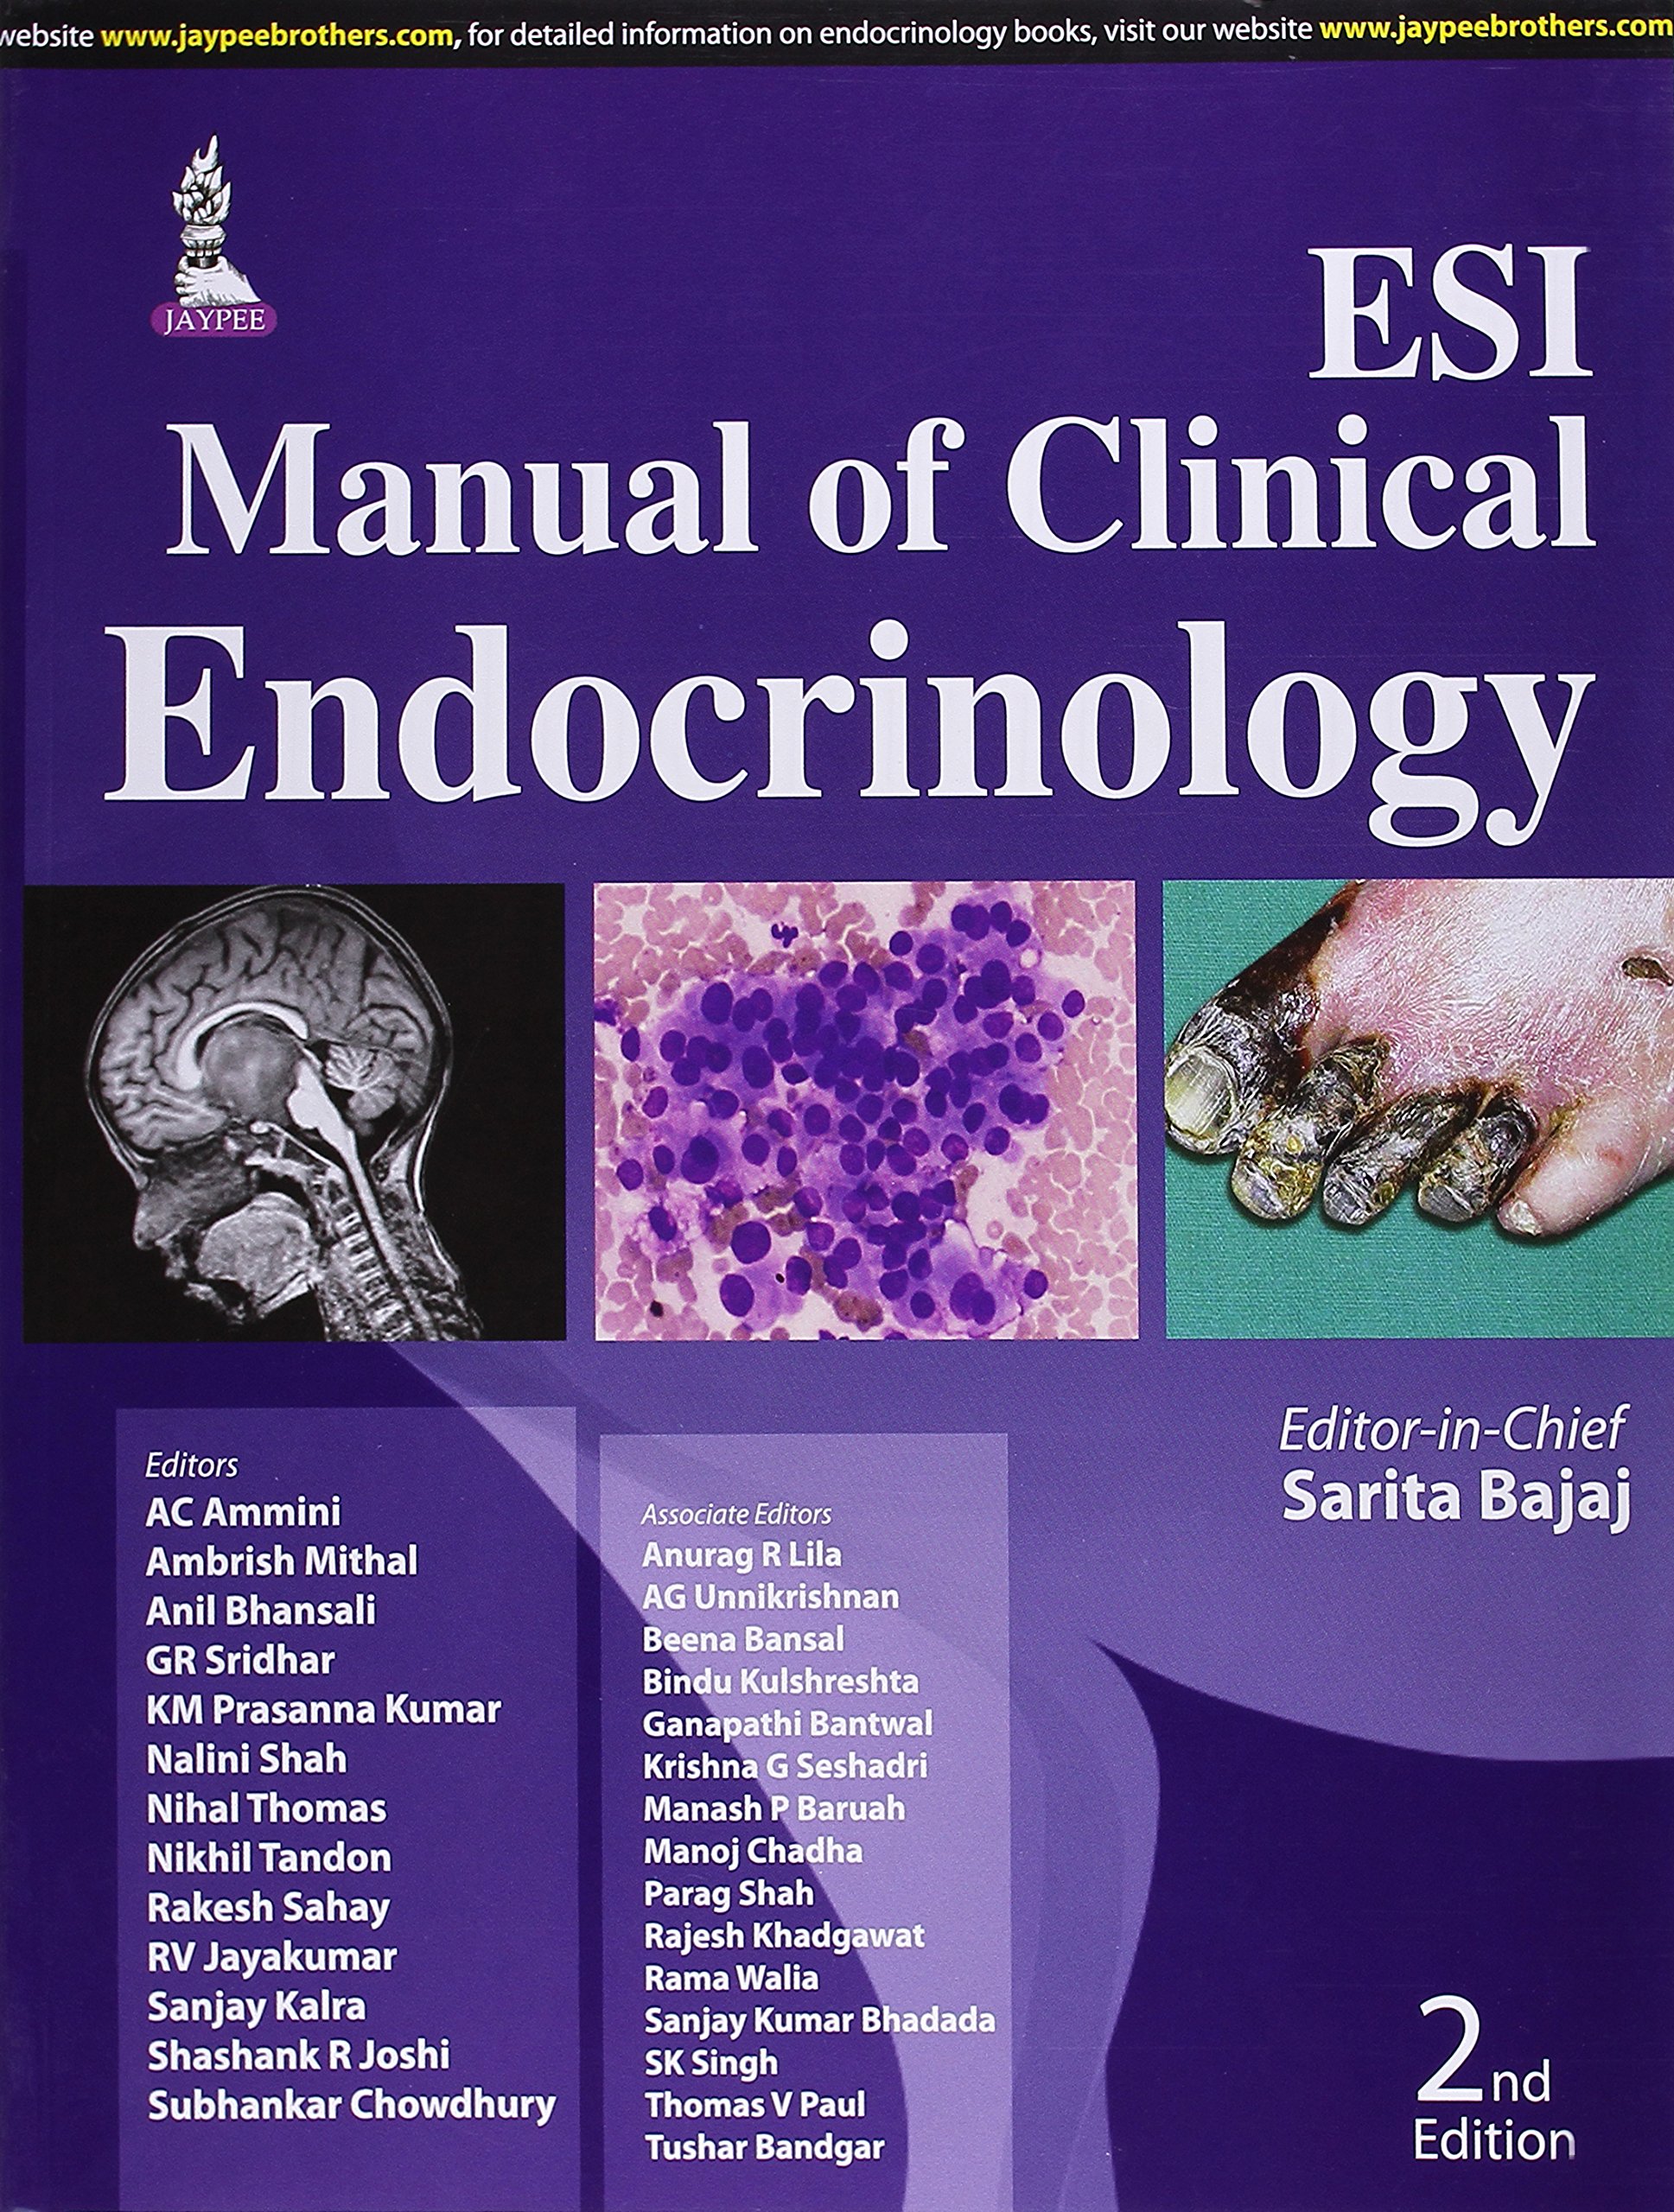 esi-manual-of-clinical-endocrinology